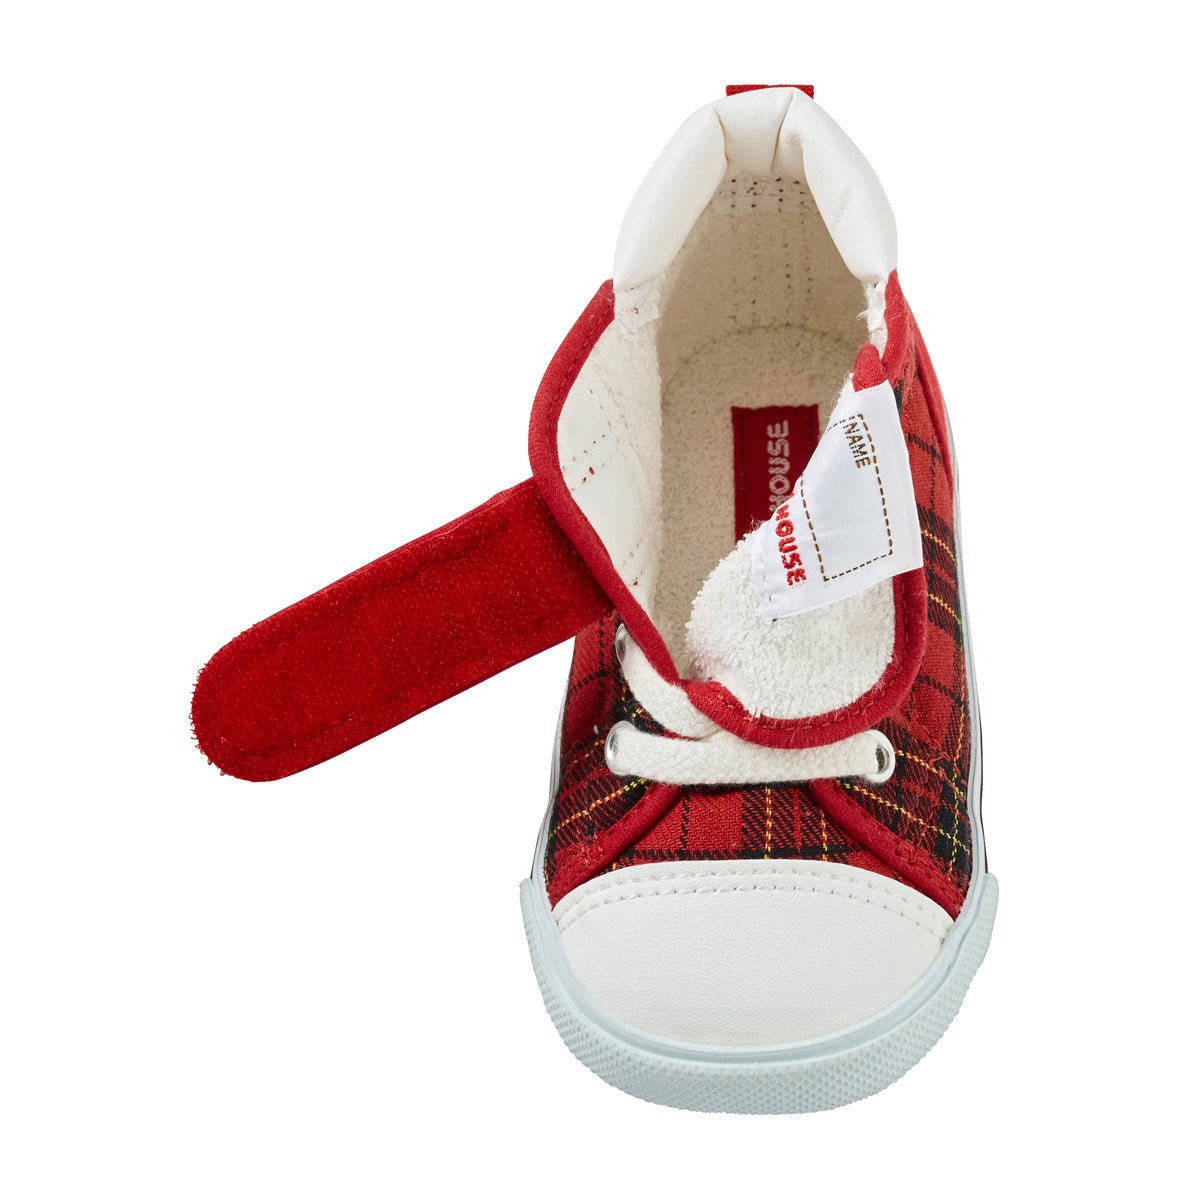 High Top Second Shoes - Stylish Plaid - MIKI HOUSE USA